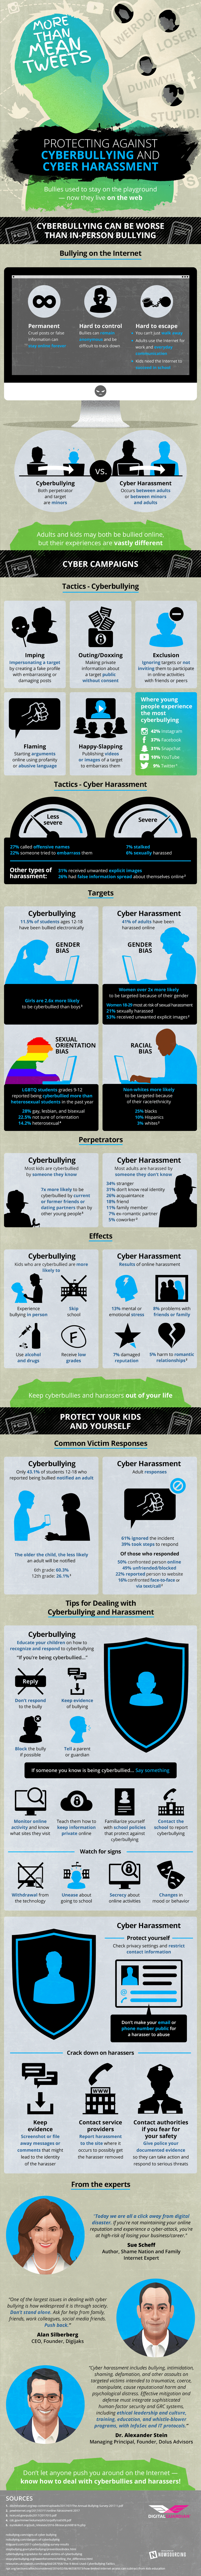 More Than Mean Tweets: Protecting Against Cyberbullying and Cyber Harassments Infographic